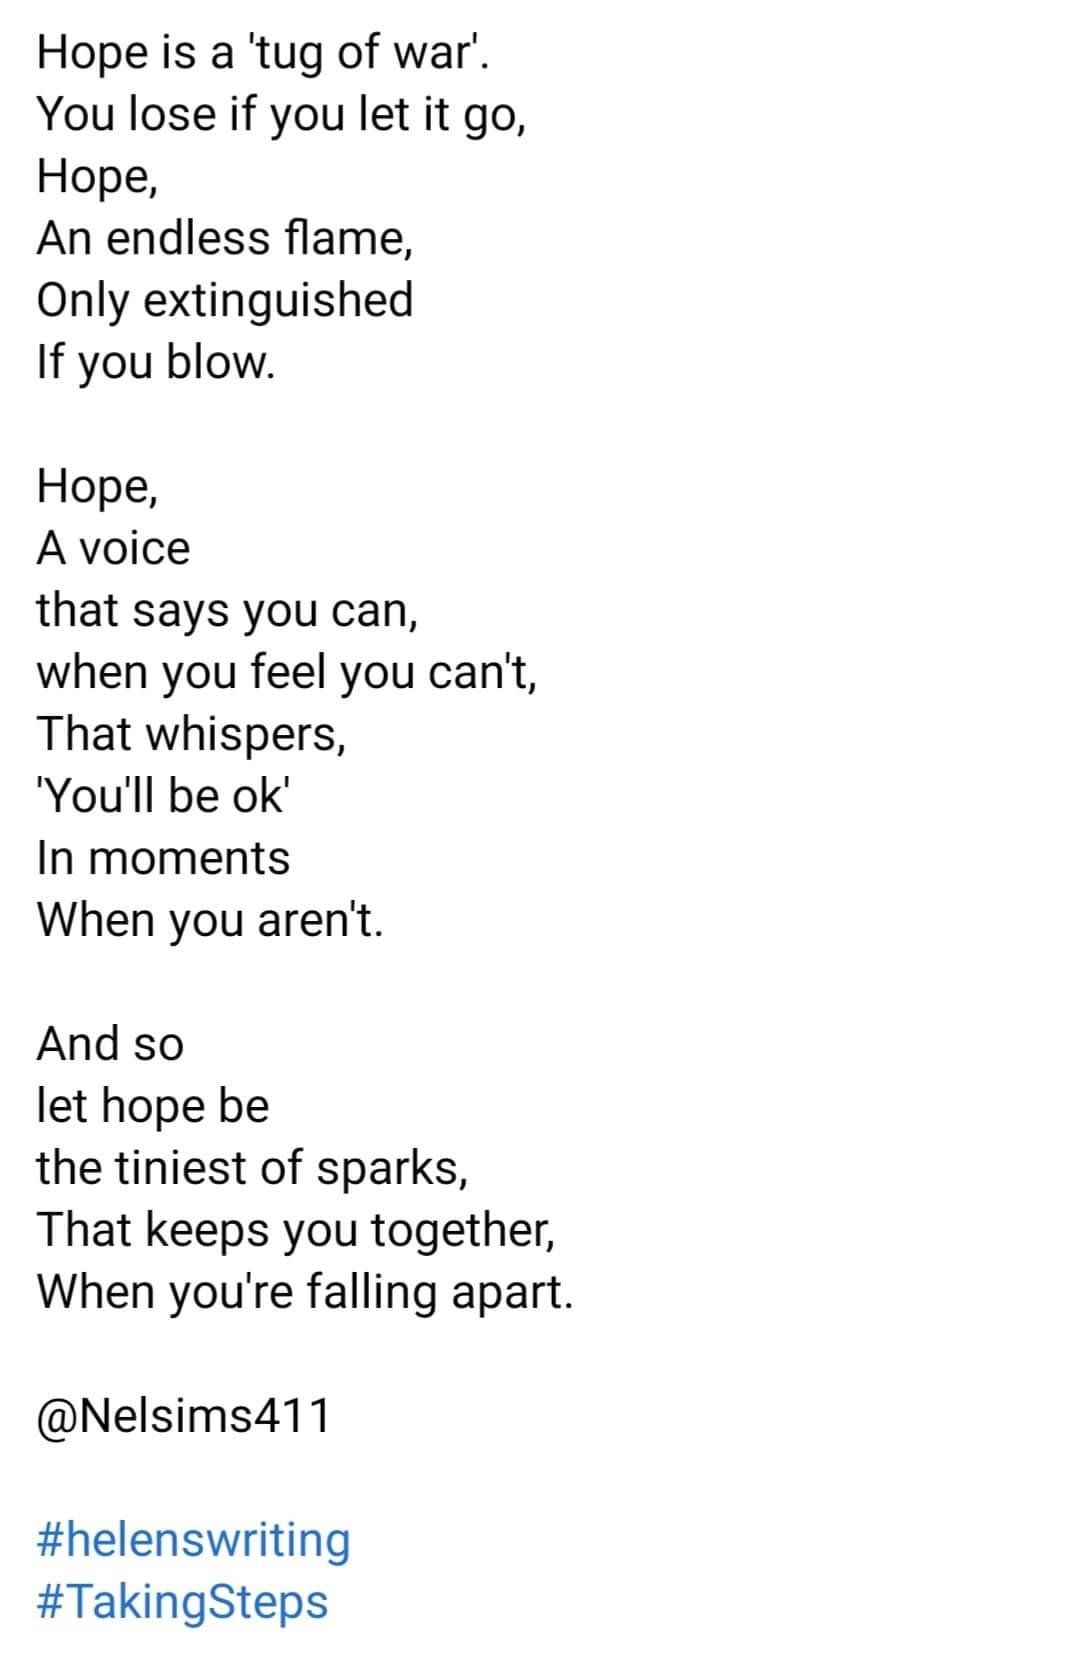 A JPeg of Helen's Poem - Hope - as featured in this Podcast